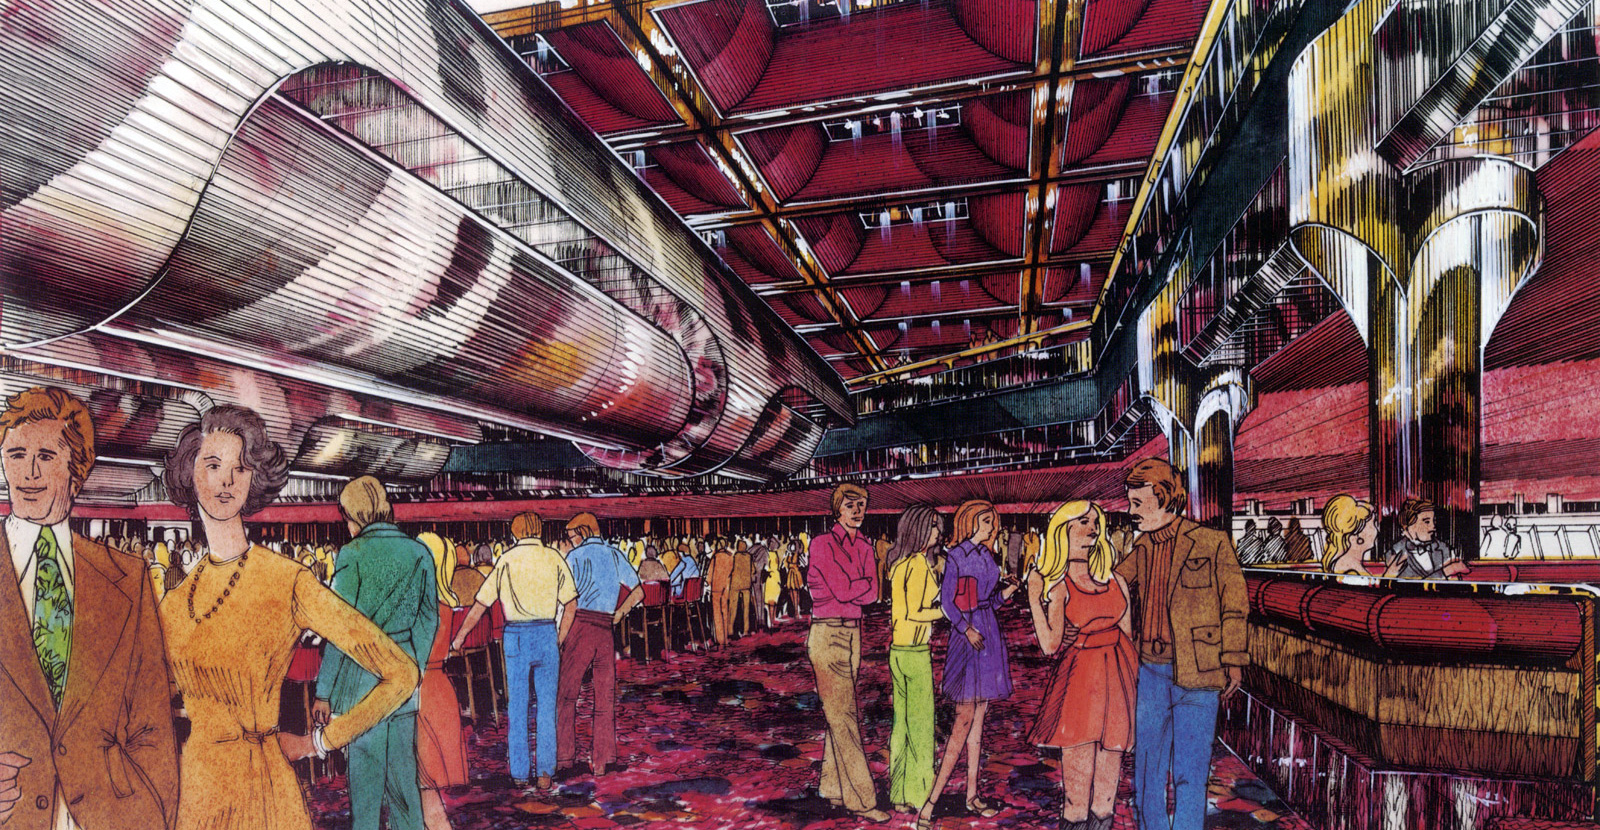 Illustration of Martin Stern Jr.’s vision for the main floor of the unrealized Sahara Boardwalk casino in Atlantic City, New Jersey, circa nineteen eighty. The illustration features a magenta carpet.